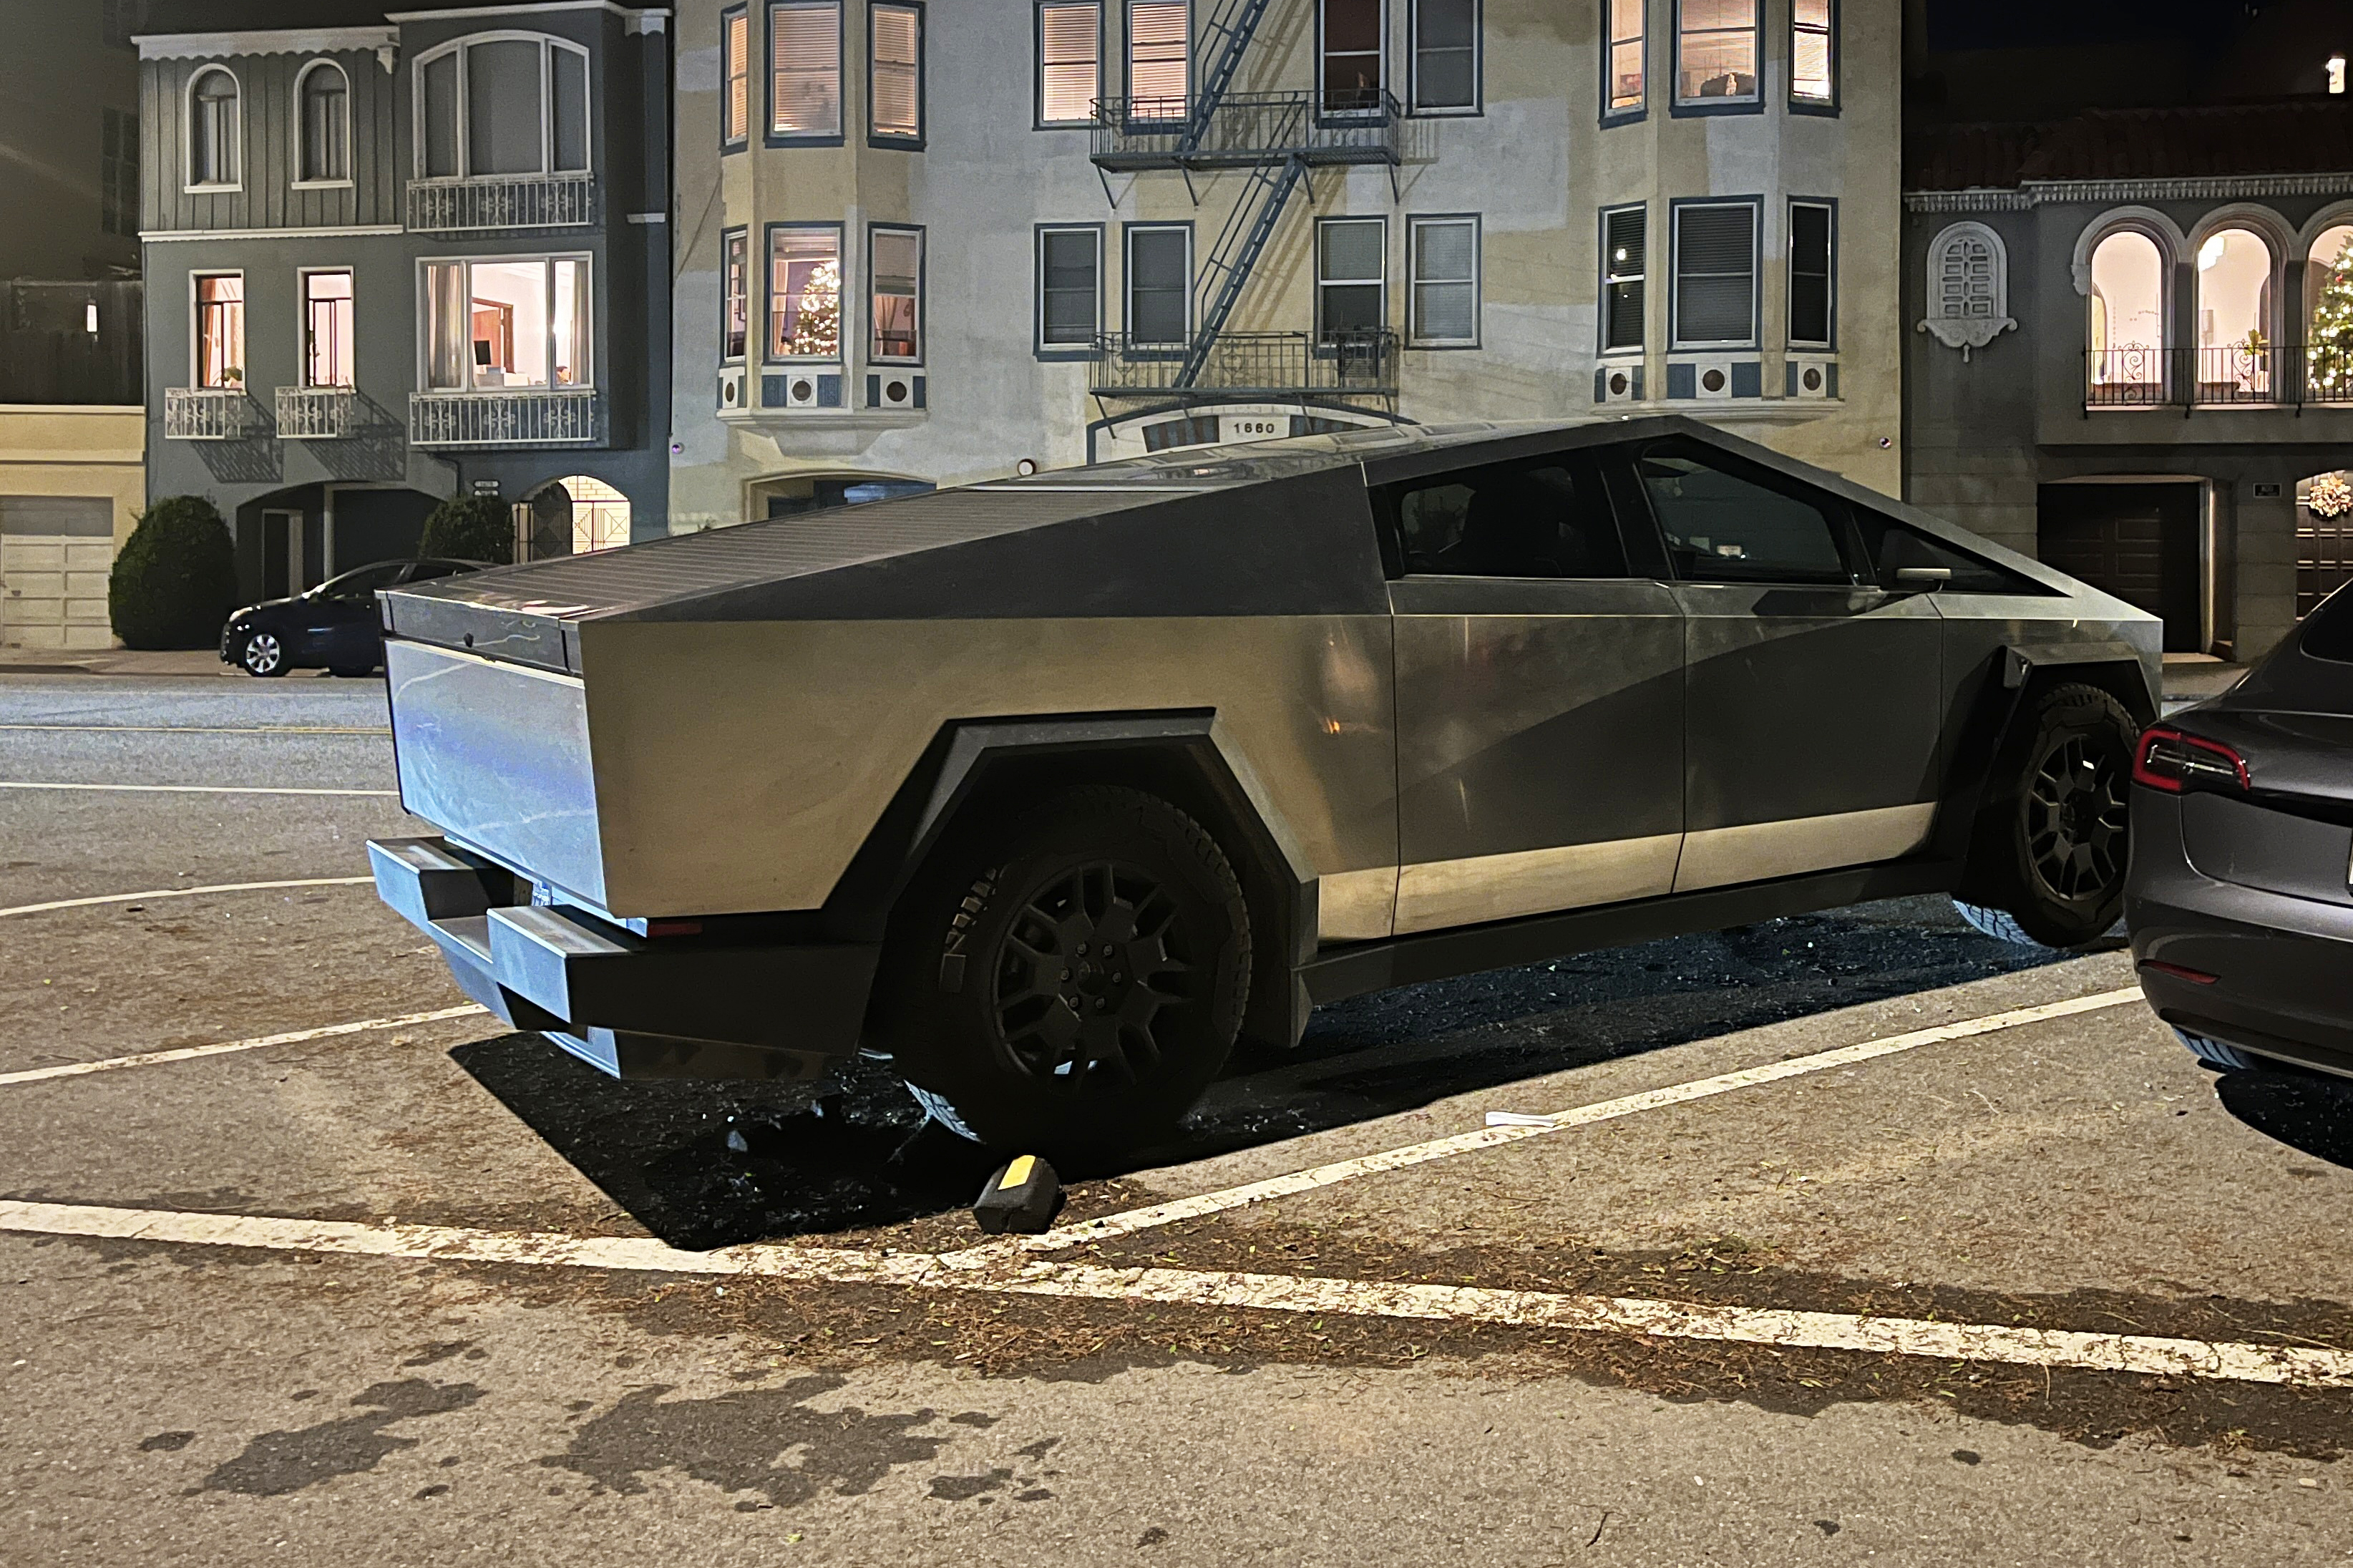 A futuristic-looking, angular vehicle parked on a city street at night, with traditional houses in the background.